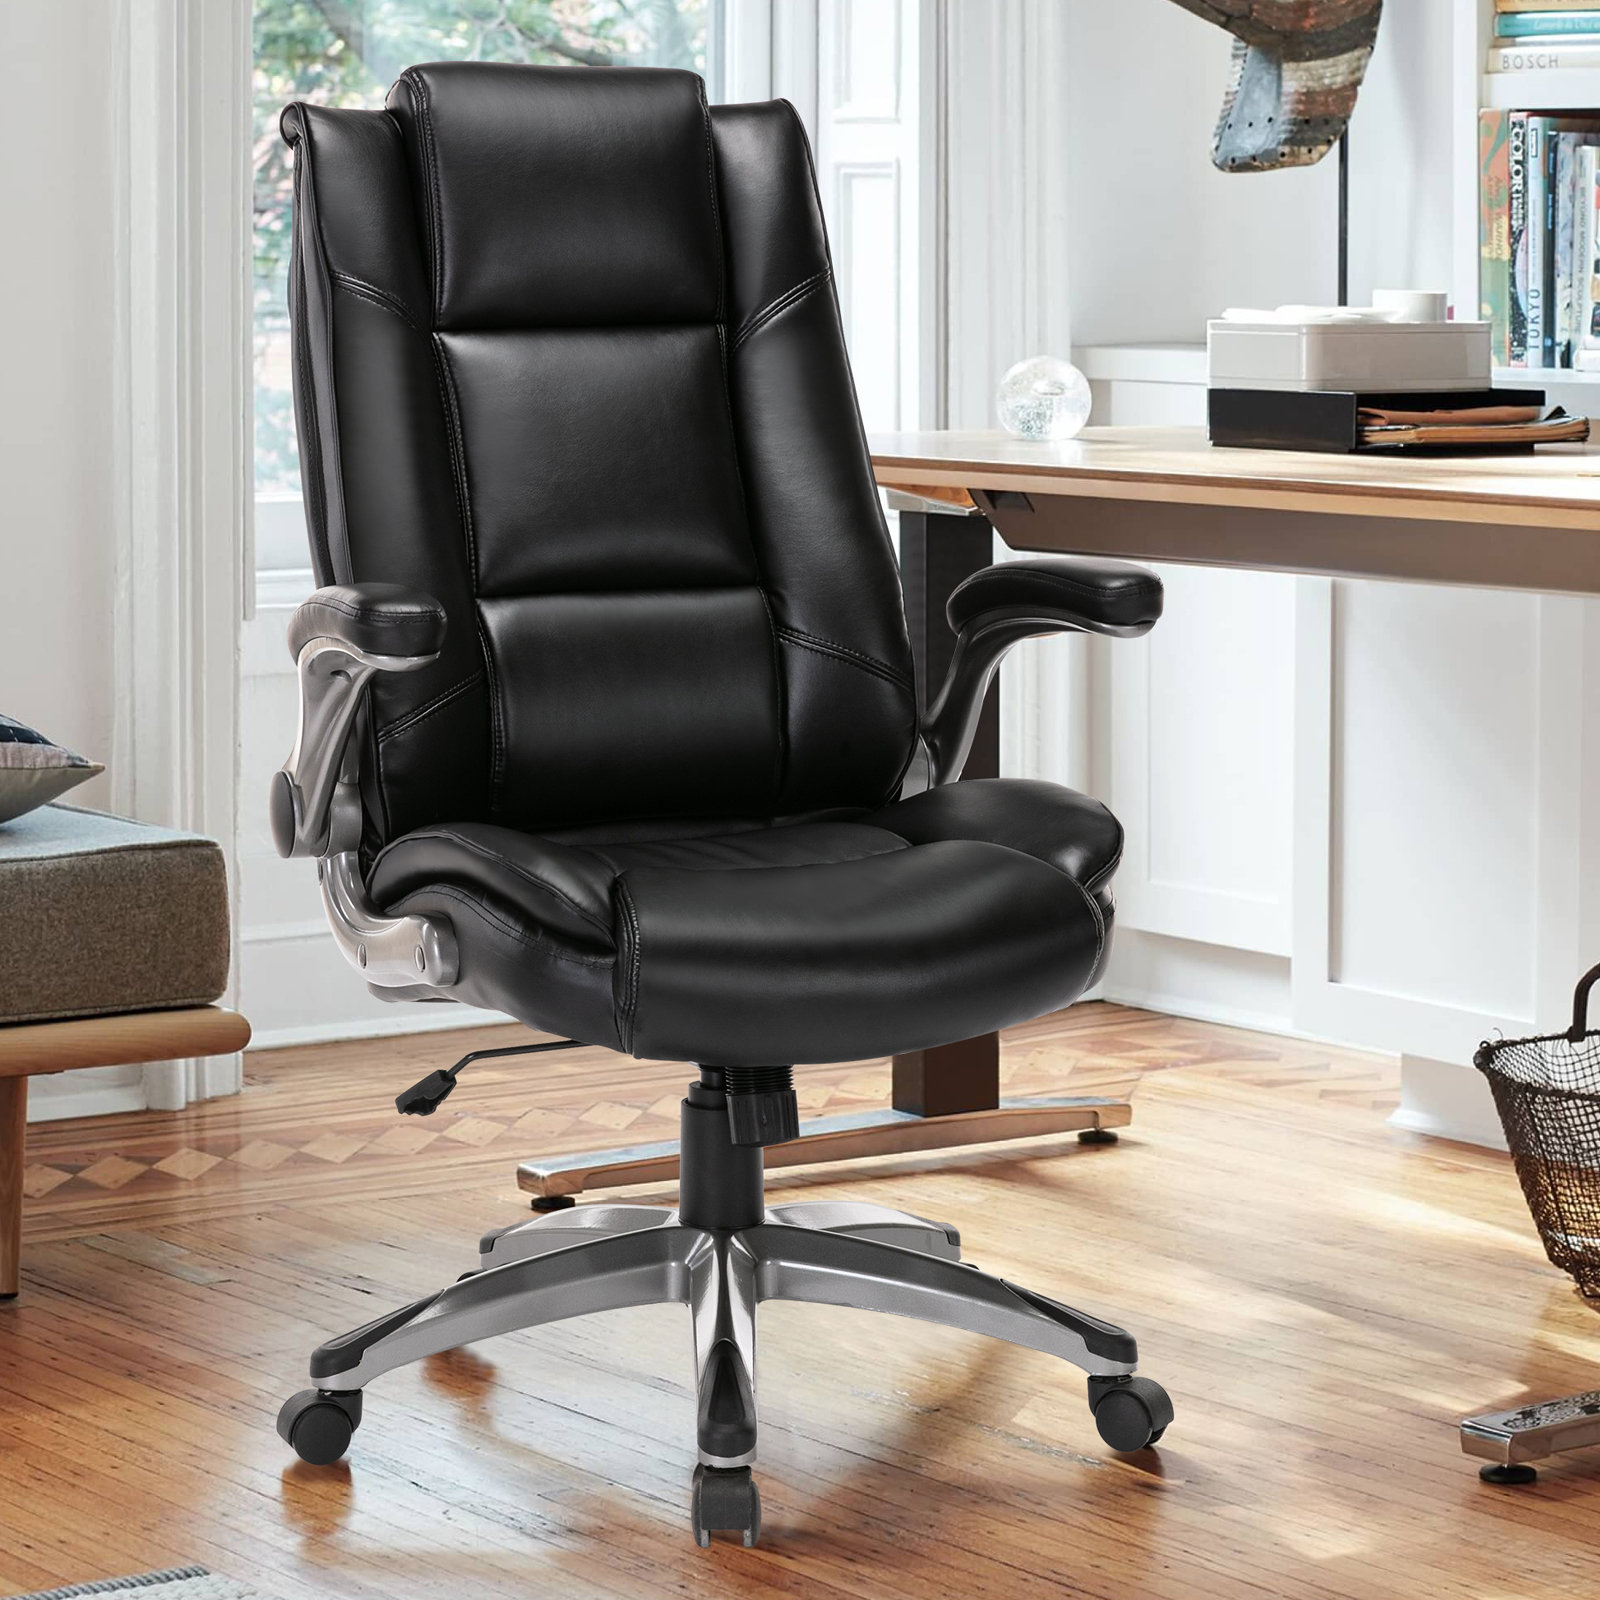 Executive Office Chair with Angle Recline Locking System and